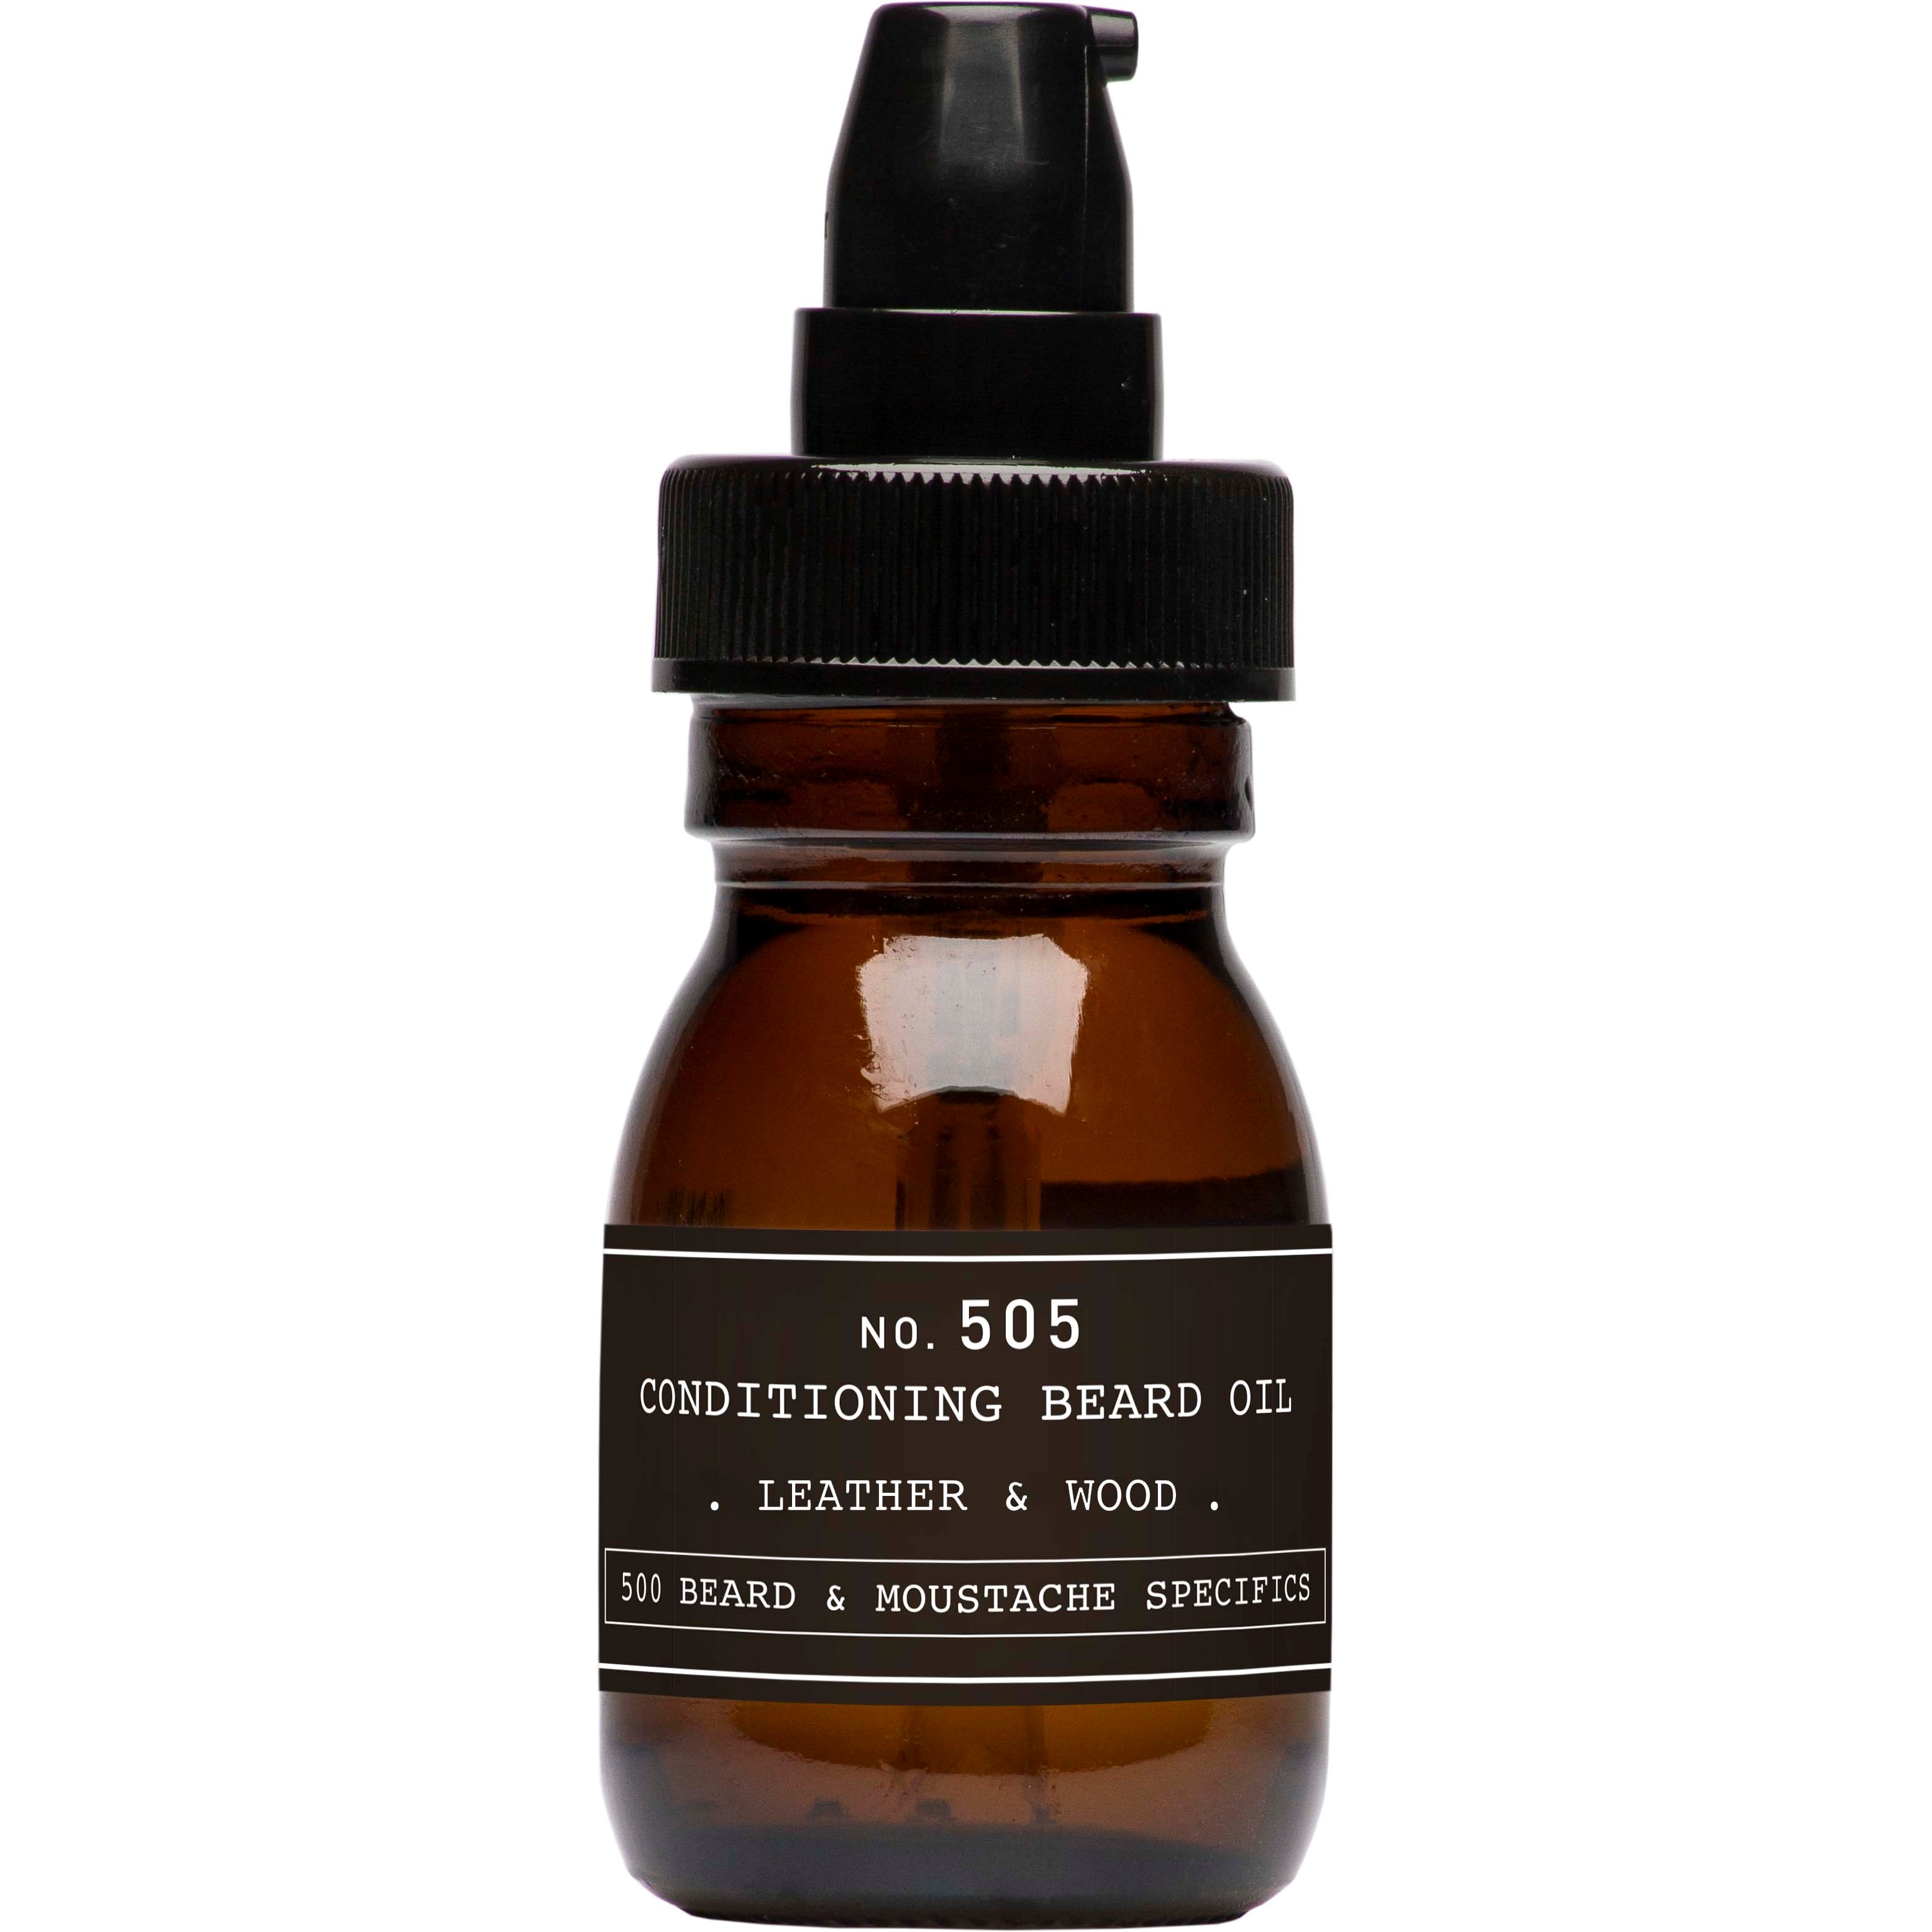 DEPOT MALE TOOLS No. 505 Conditioning Beard Oil .Leather & Wood 30 ml